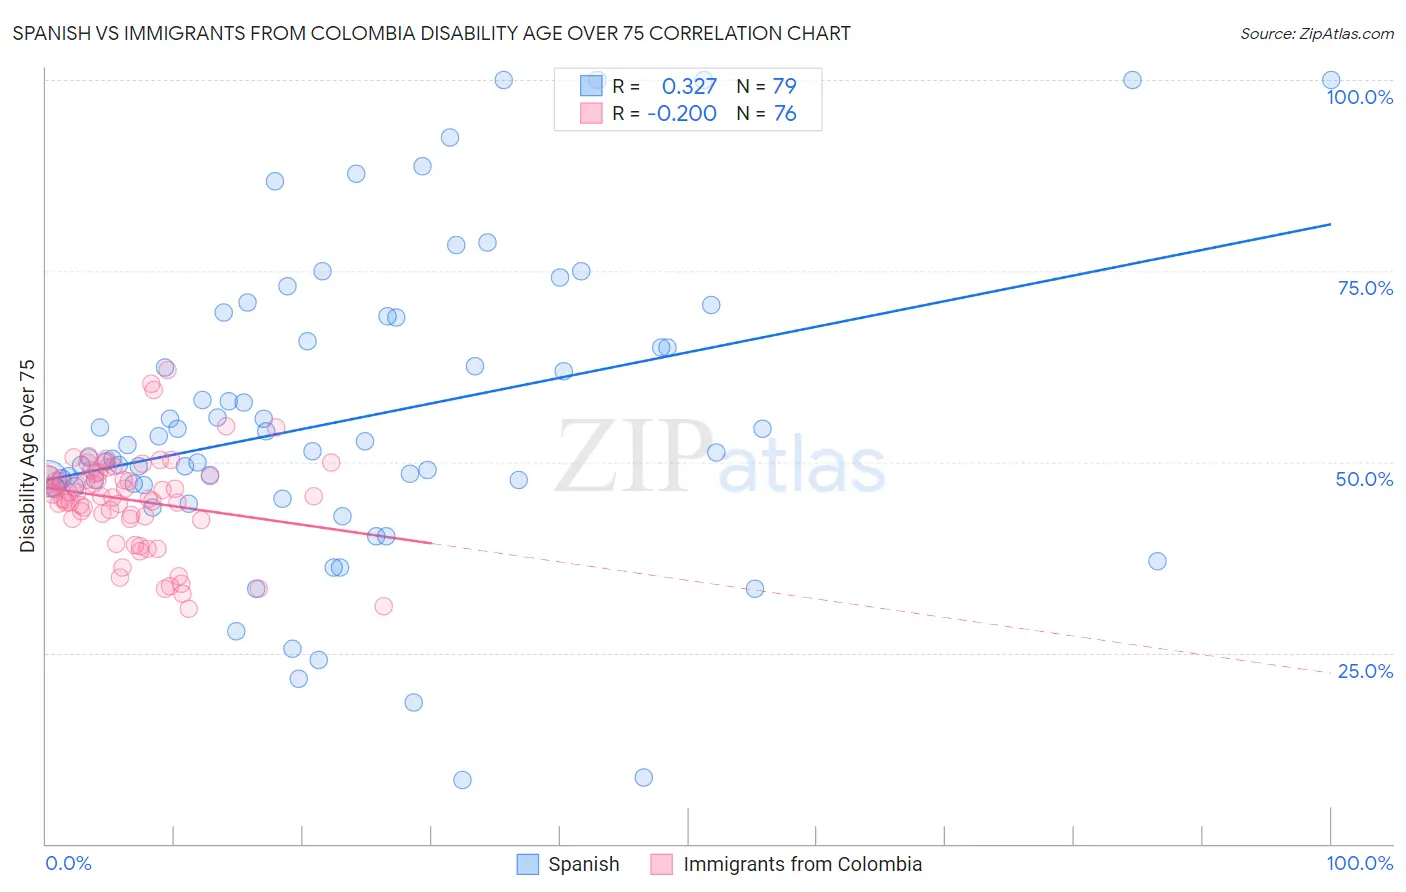 Spanish vs Immigrants from Colombia Disability Age Over 75